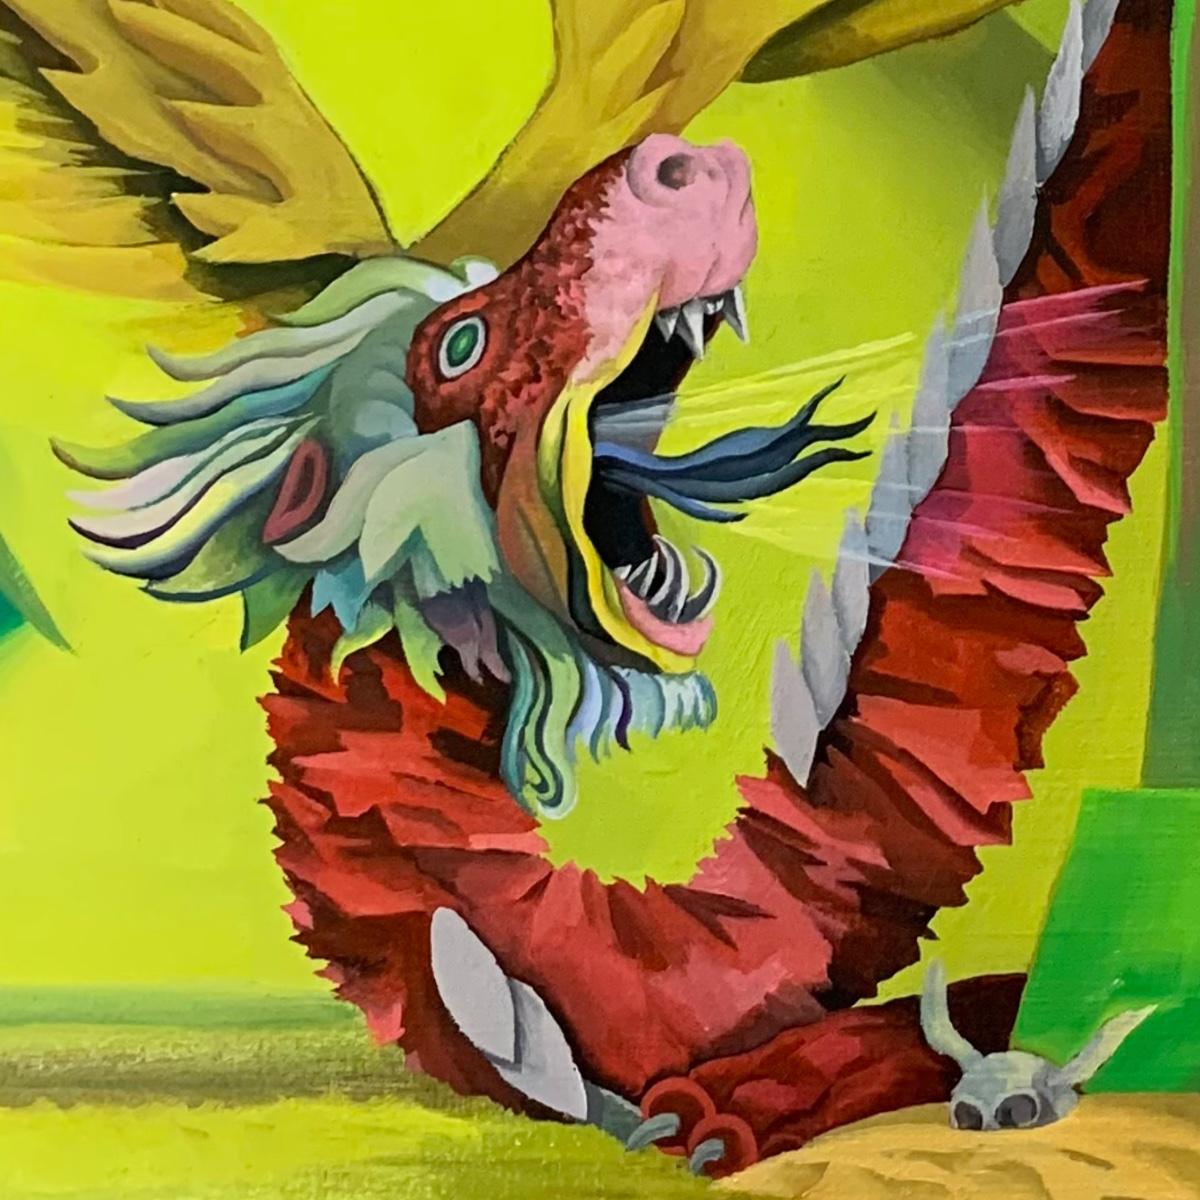 A painted red dragon with its mouth open, yellow background.